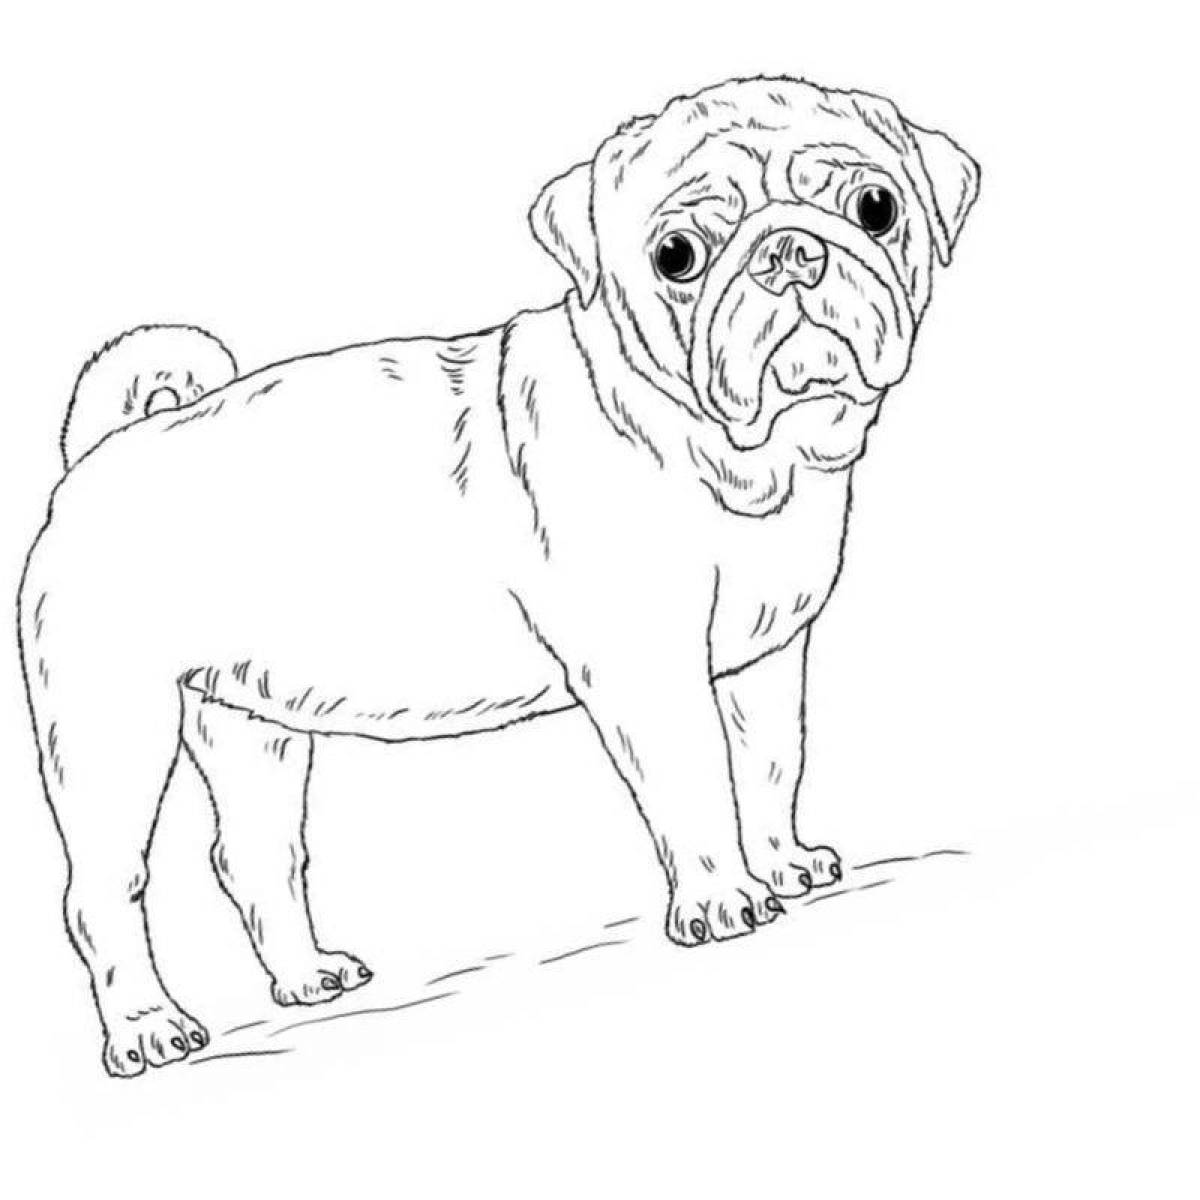 Colorful pug caterpillar coloring page